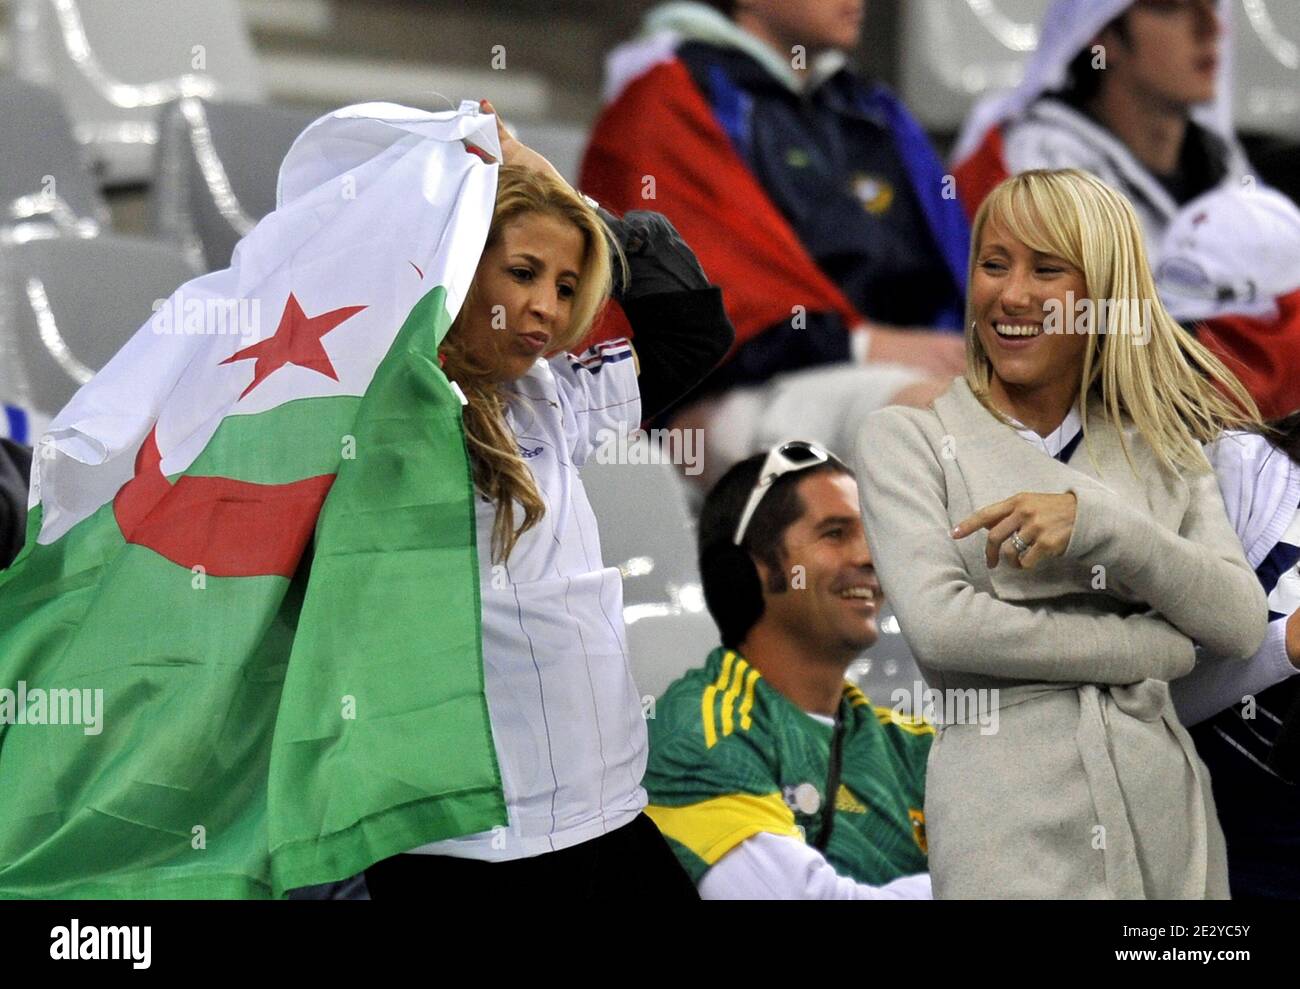 French national football team players' wives, France's striker Franck Ribery's wife Wahiba wears an Algerian flag and unidentified woman during the FIFA World Cup soccer match, France vs Uruguay in Capetown, South Africa, on June 11, 2010. France 0-Uruguay 0. Photo by Christophe Guibbaud/Cameleon/ABACAPRESS.COM Stock Photo